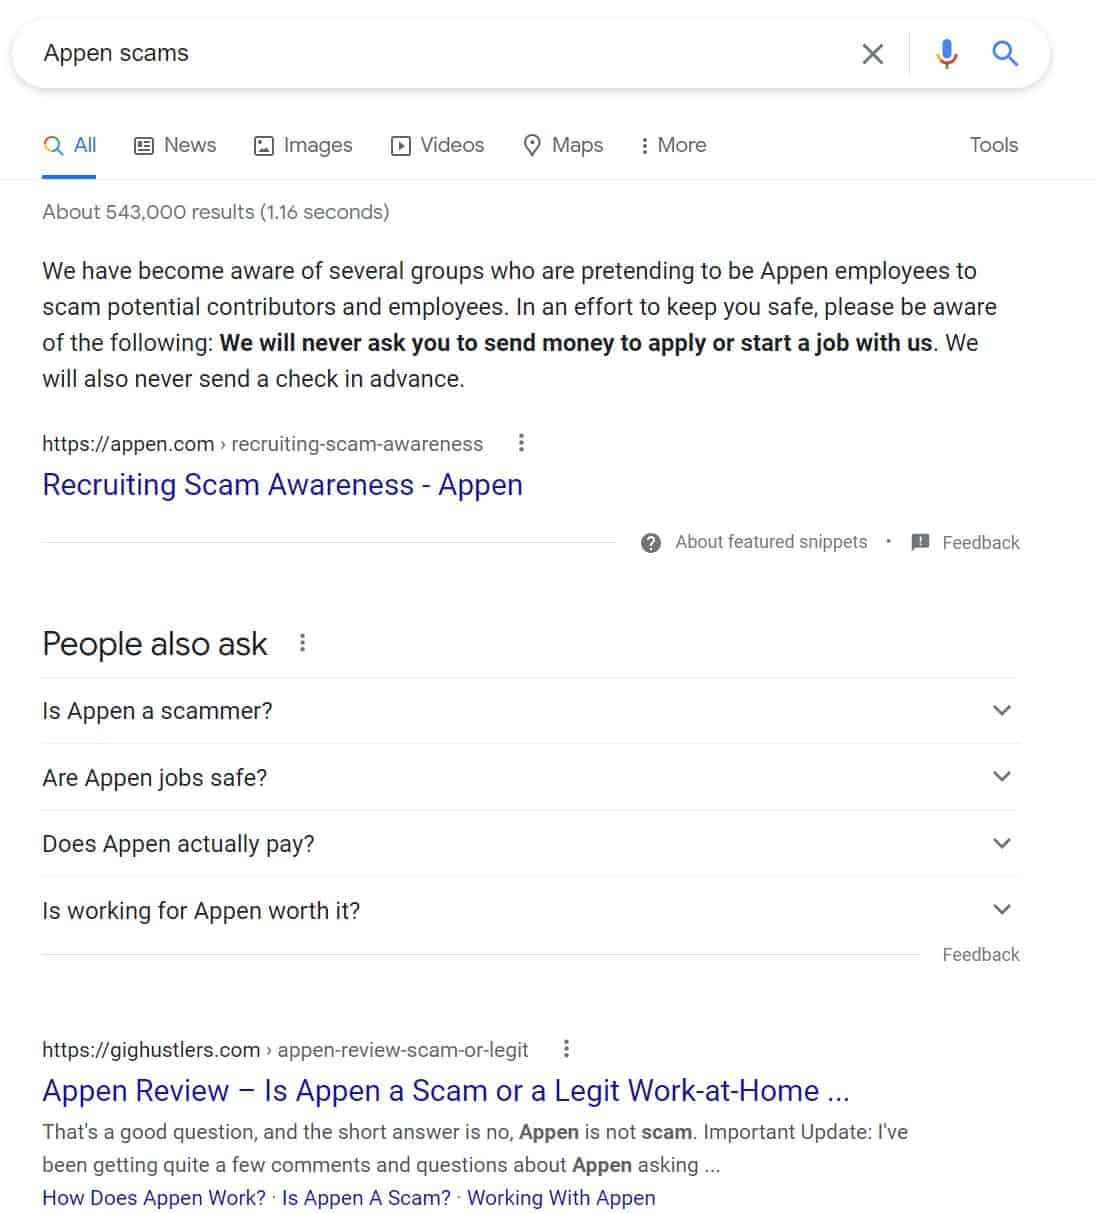 appen work from home scam results in Google